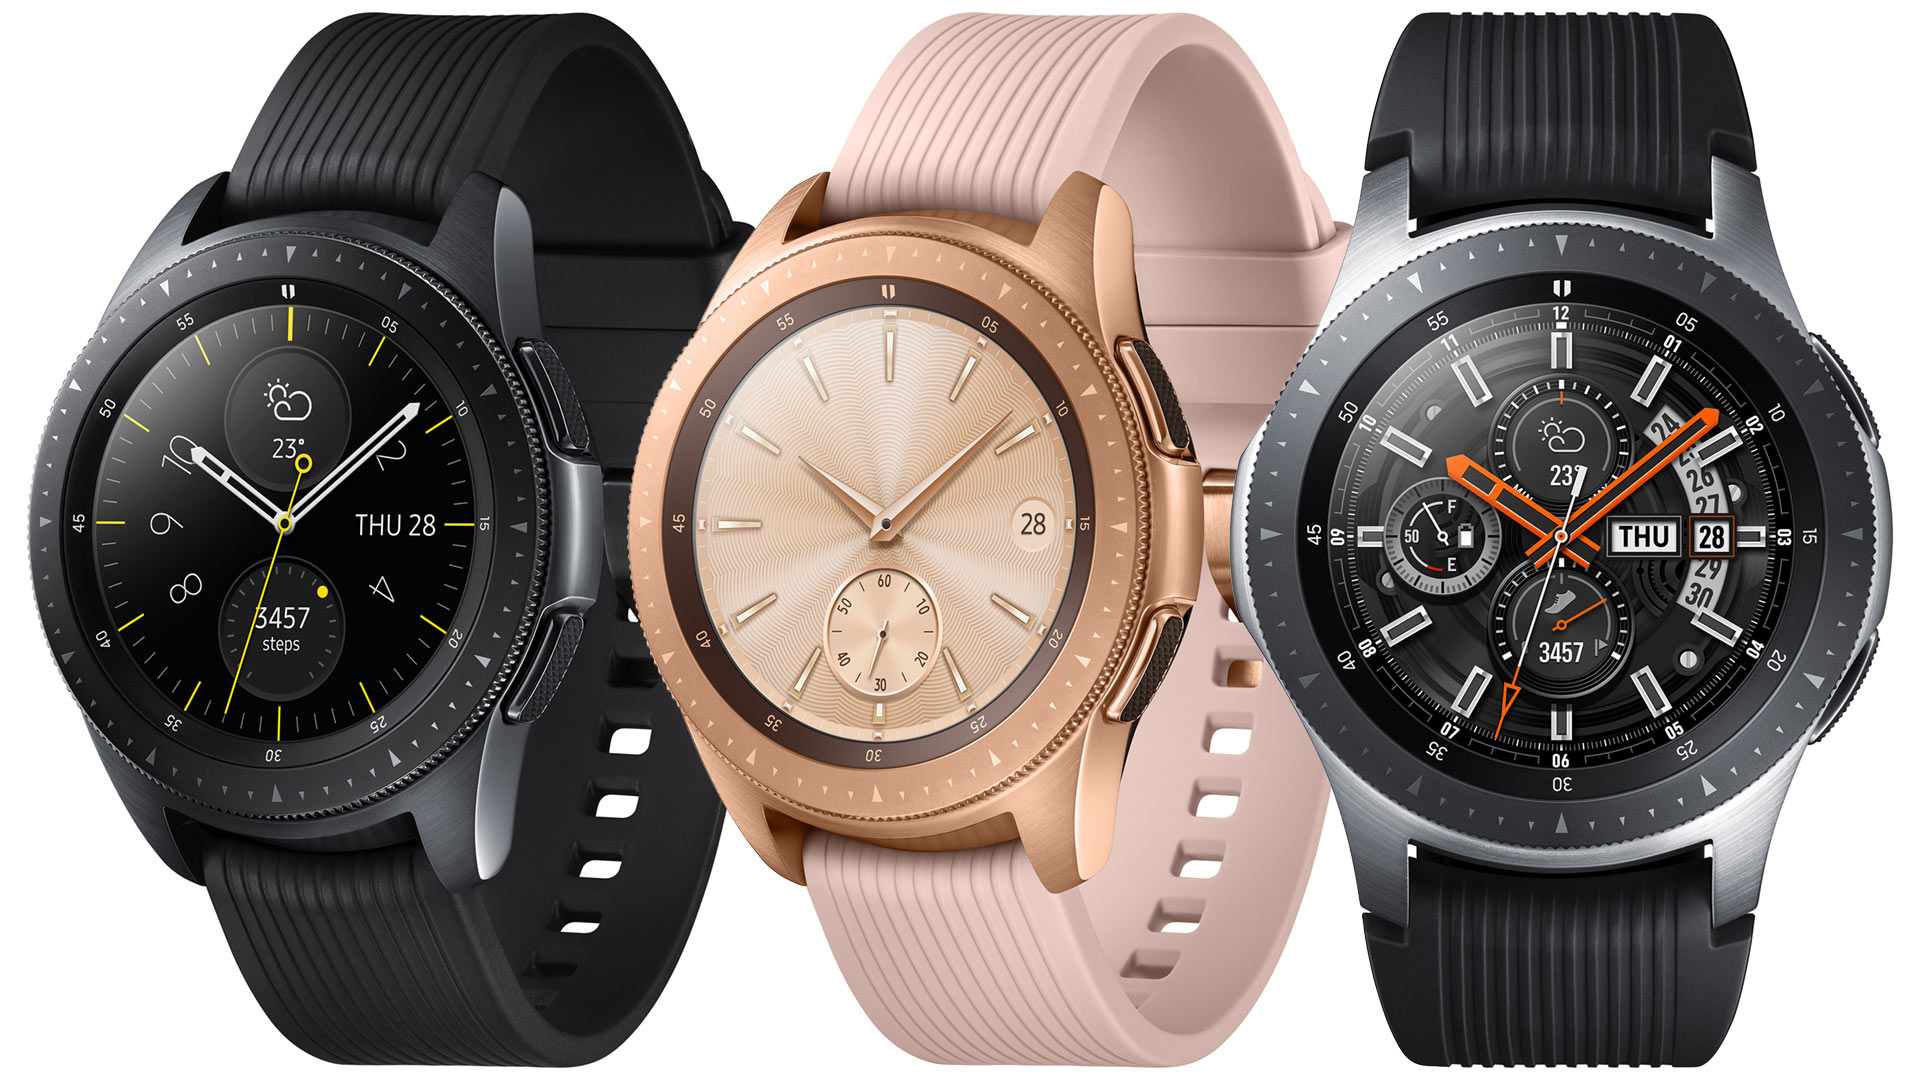 Samsung Galaxy Smartwatch For 2018 Focuses On Enhancing Battery Life